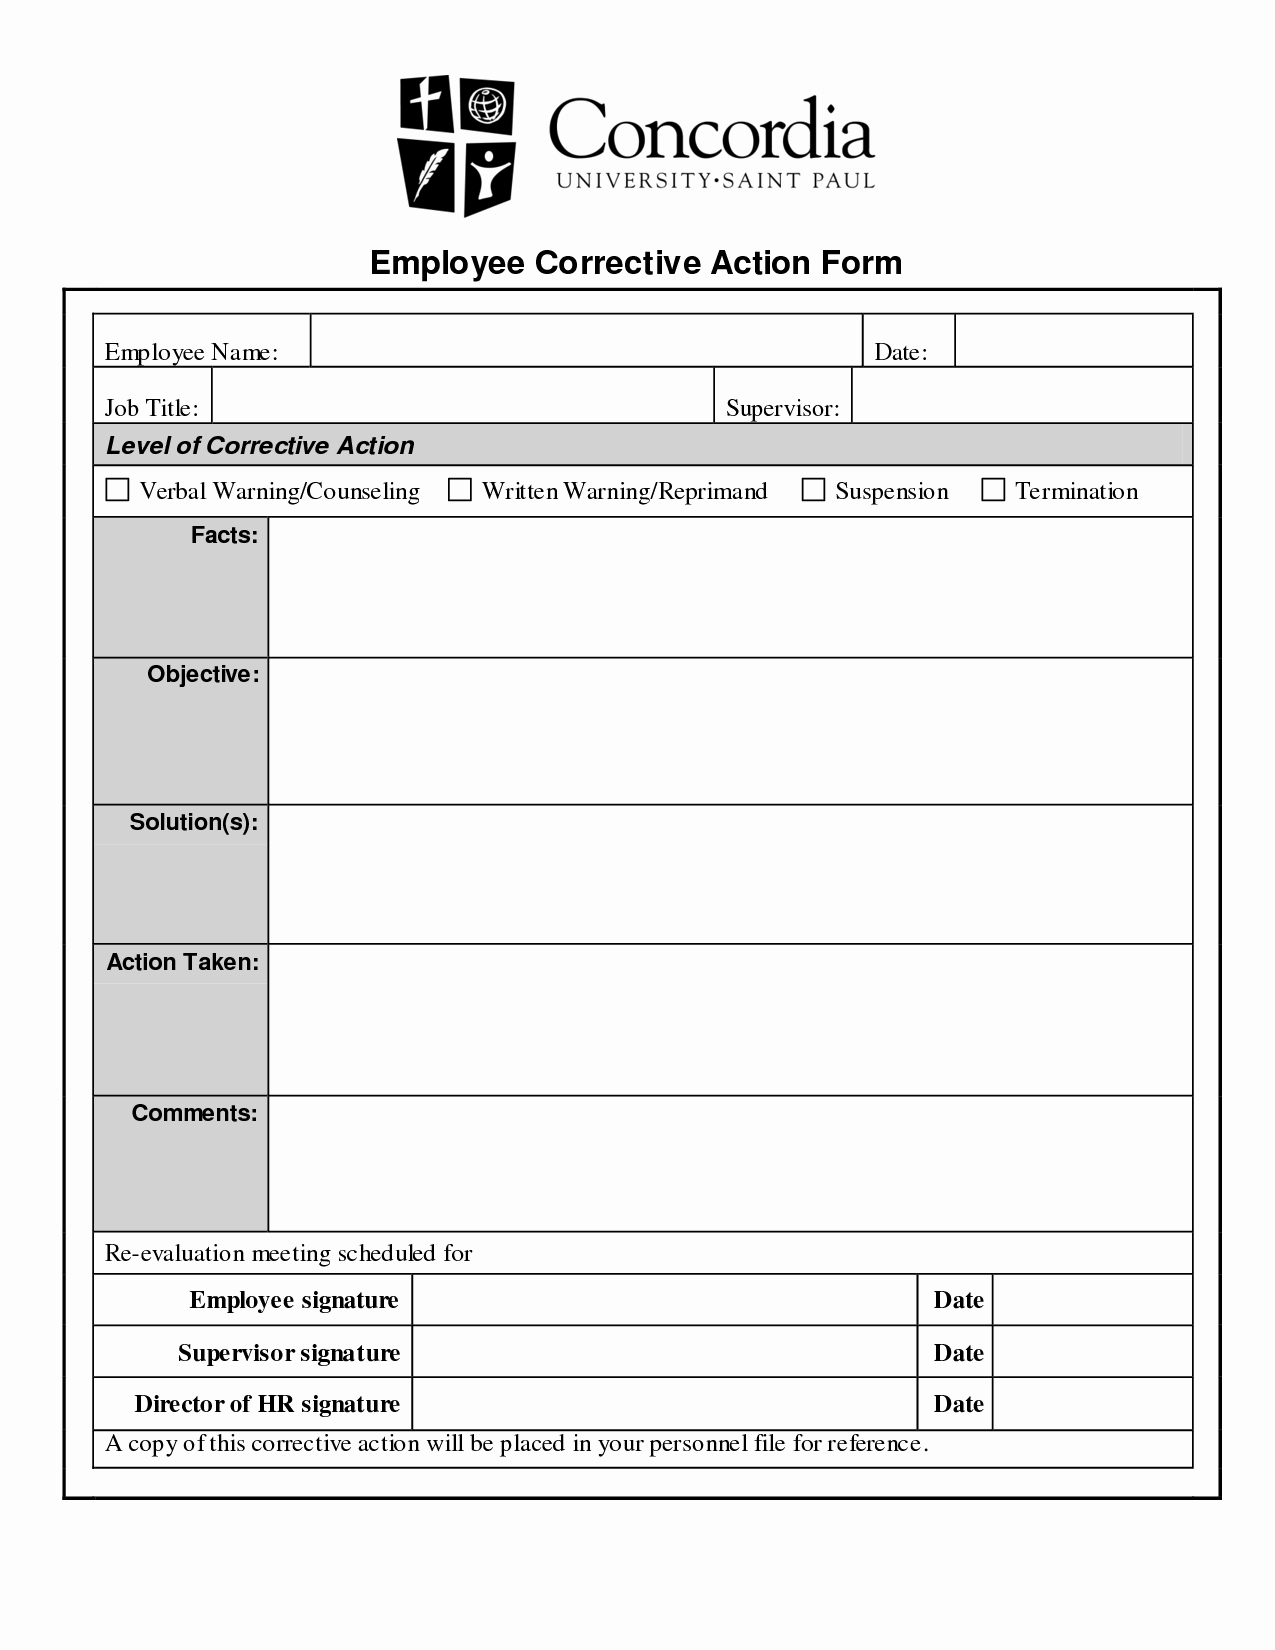 Corrective Action form Template Lovely Personnel Action forms Template 5 Employee Corrective